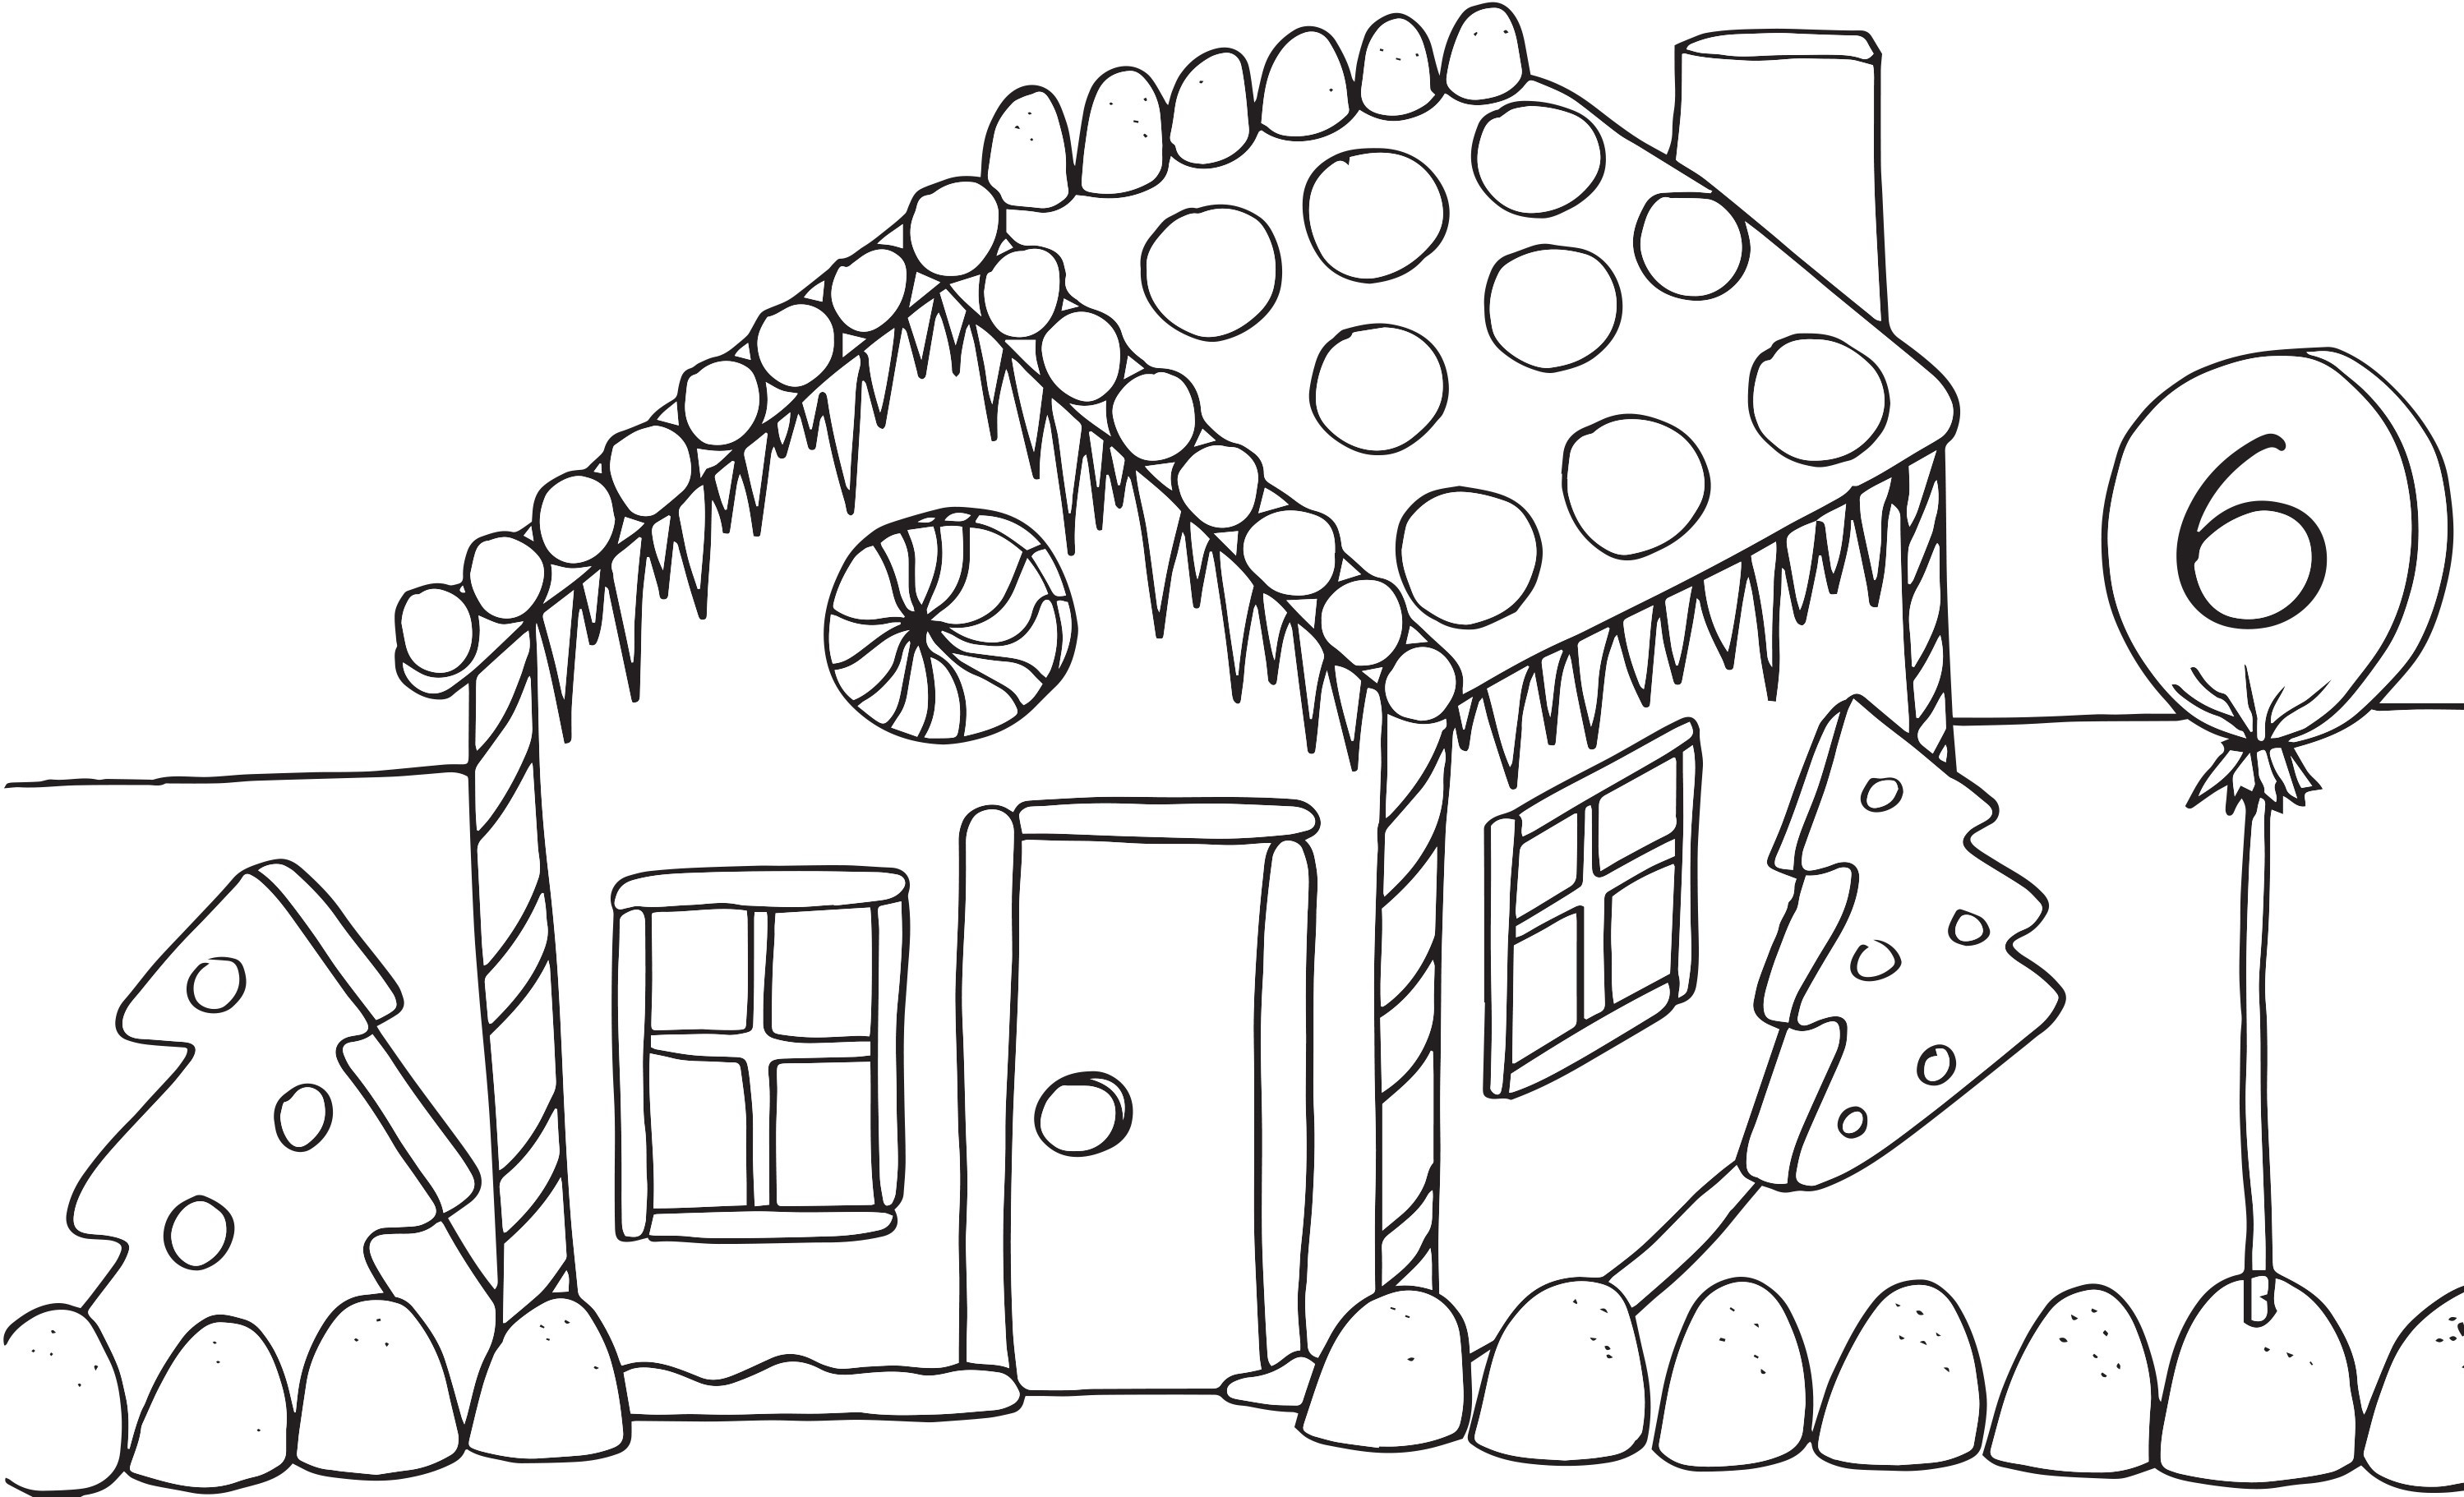 Christmas House Coloring Pages at GetDrawings | Free download